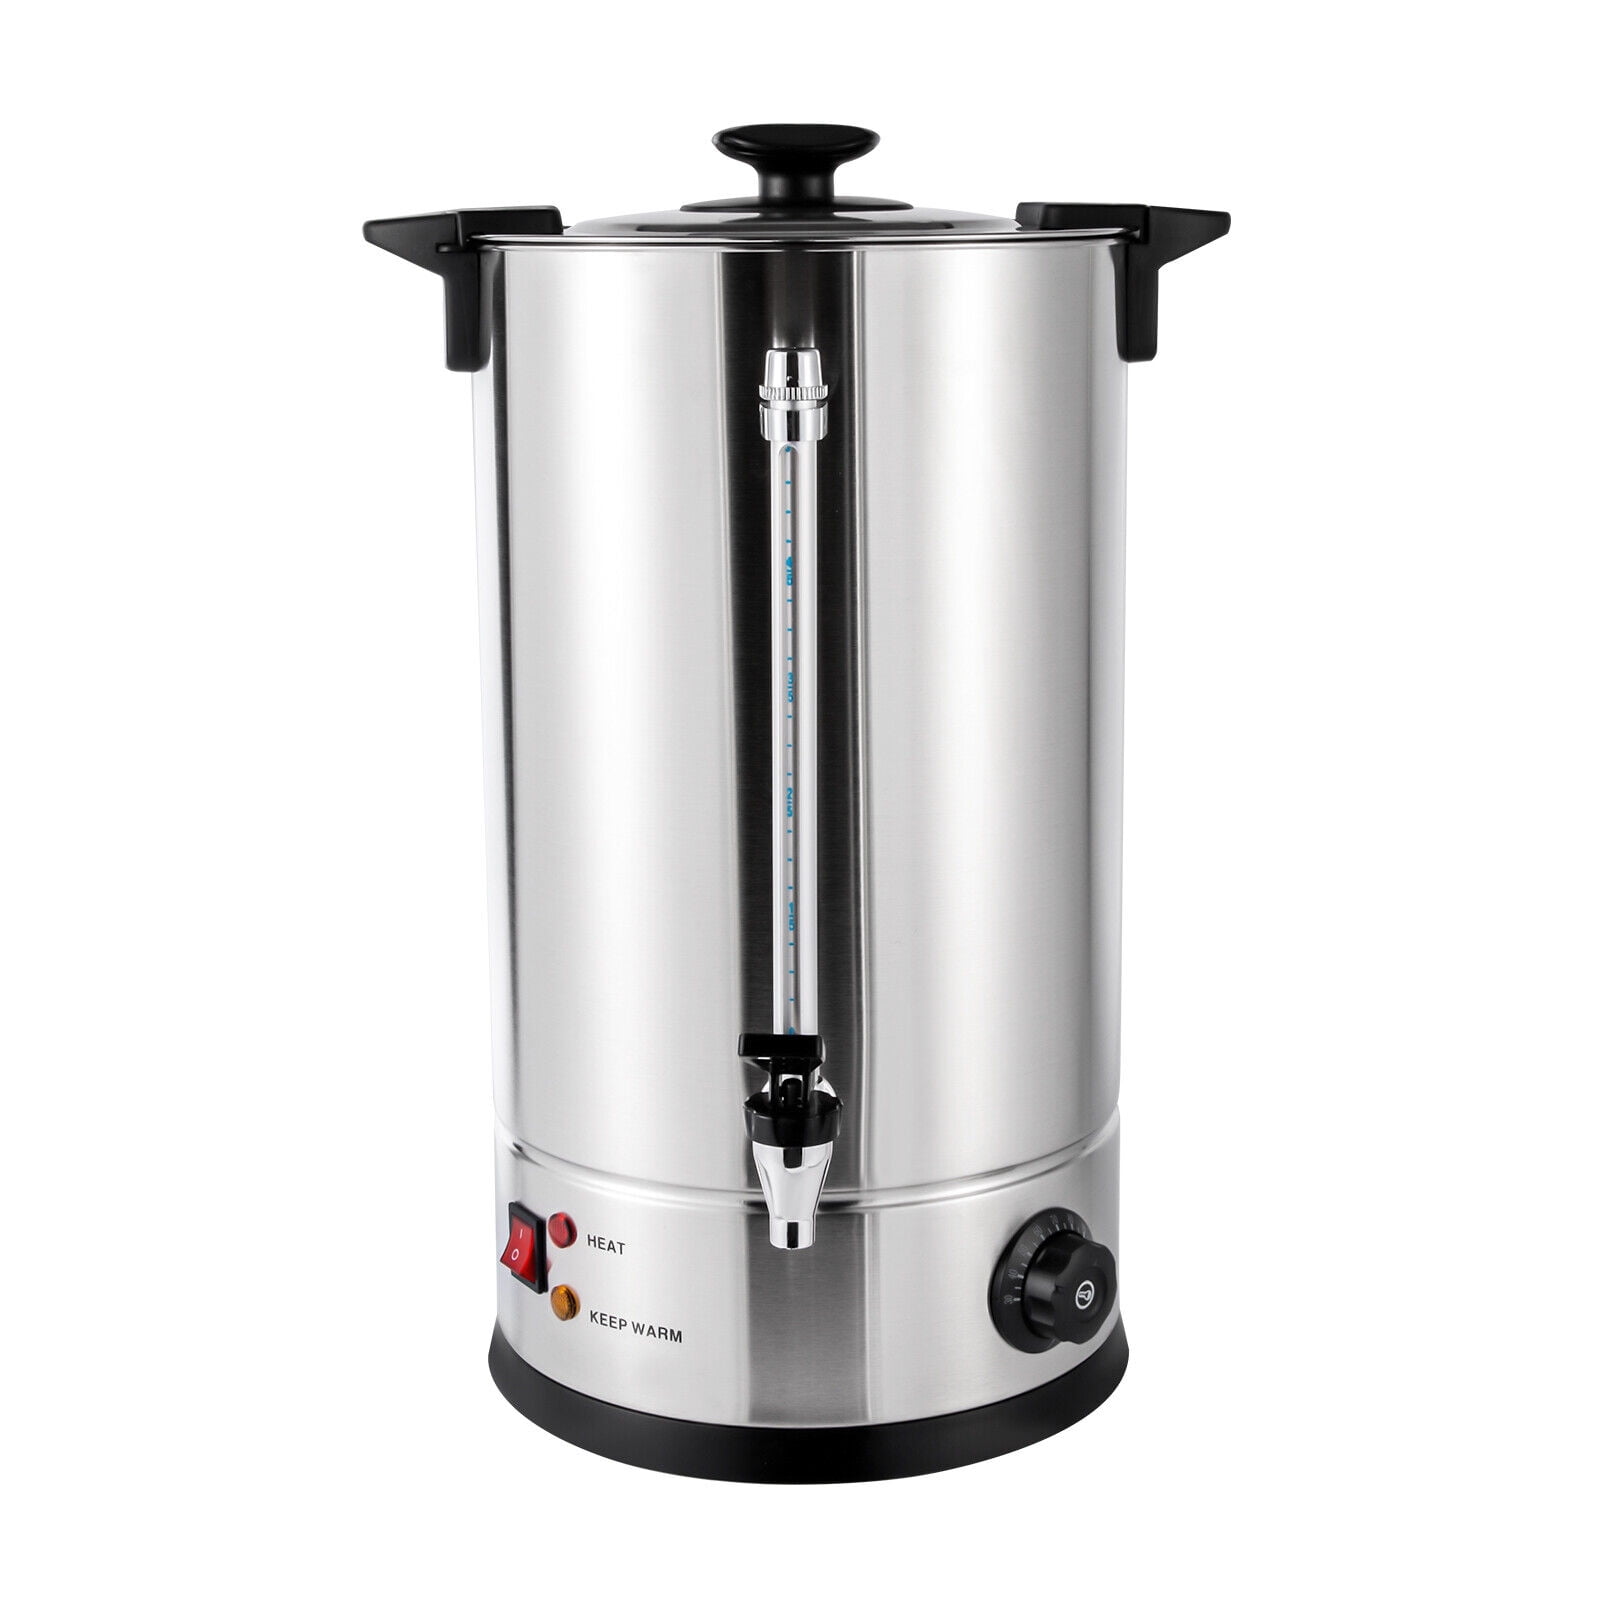 Large 22L Commercial Catering Kitchen Hot Water Electric Boiler Tea Urn  2500w